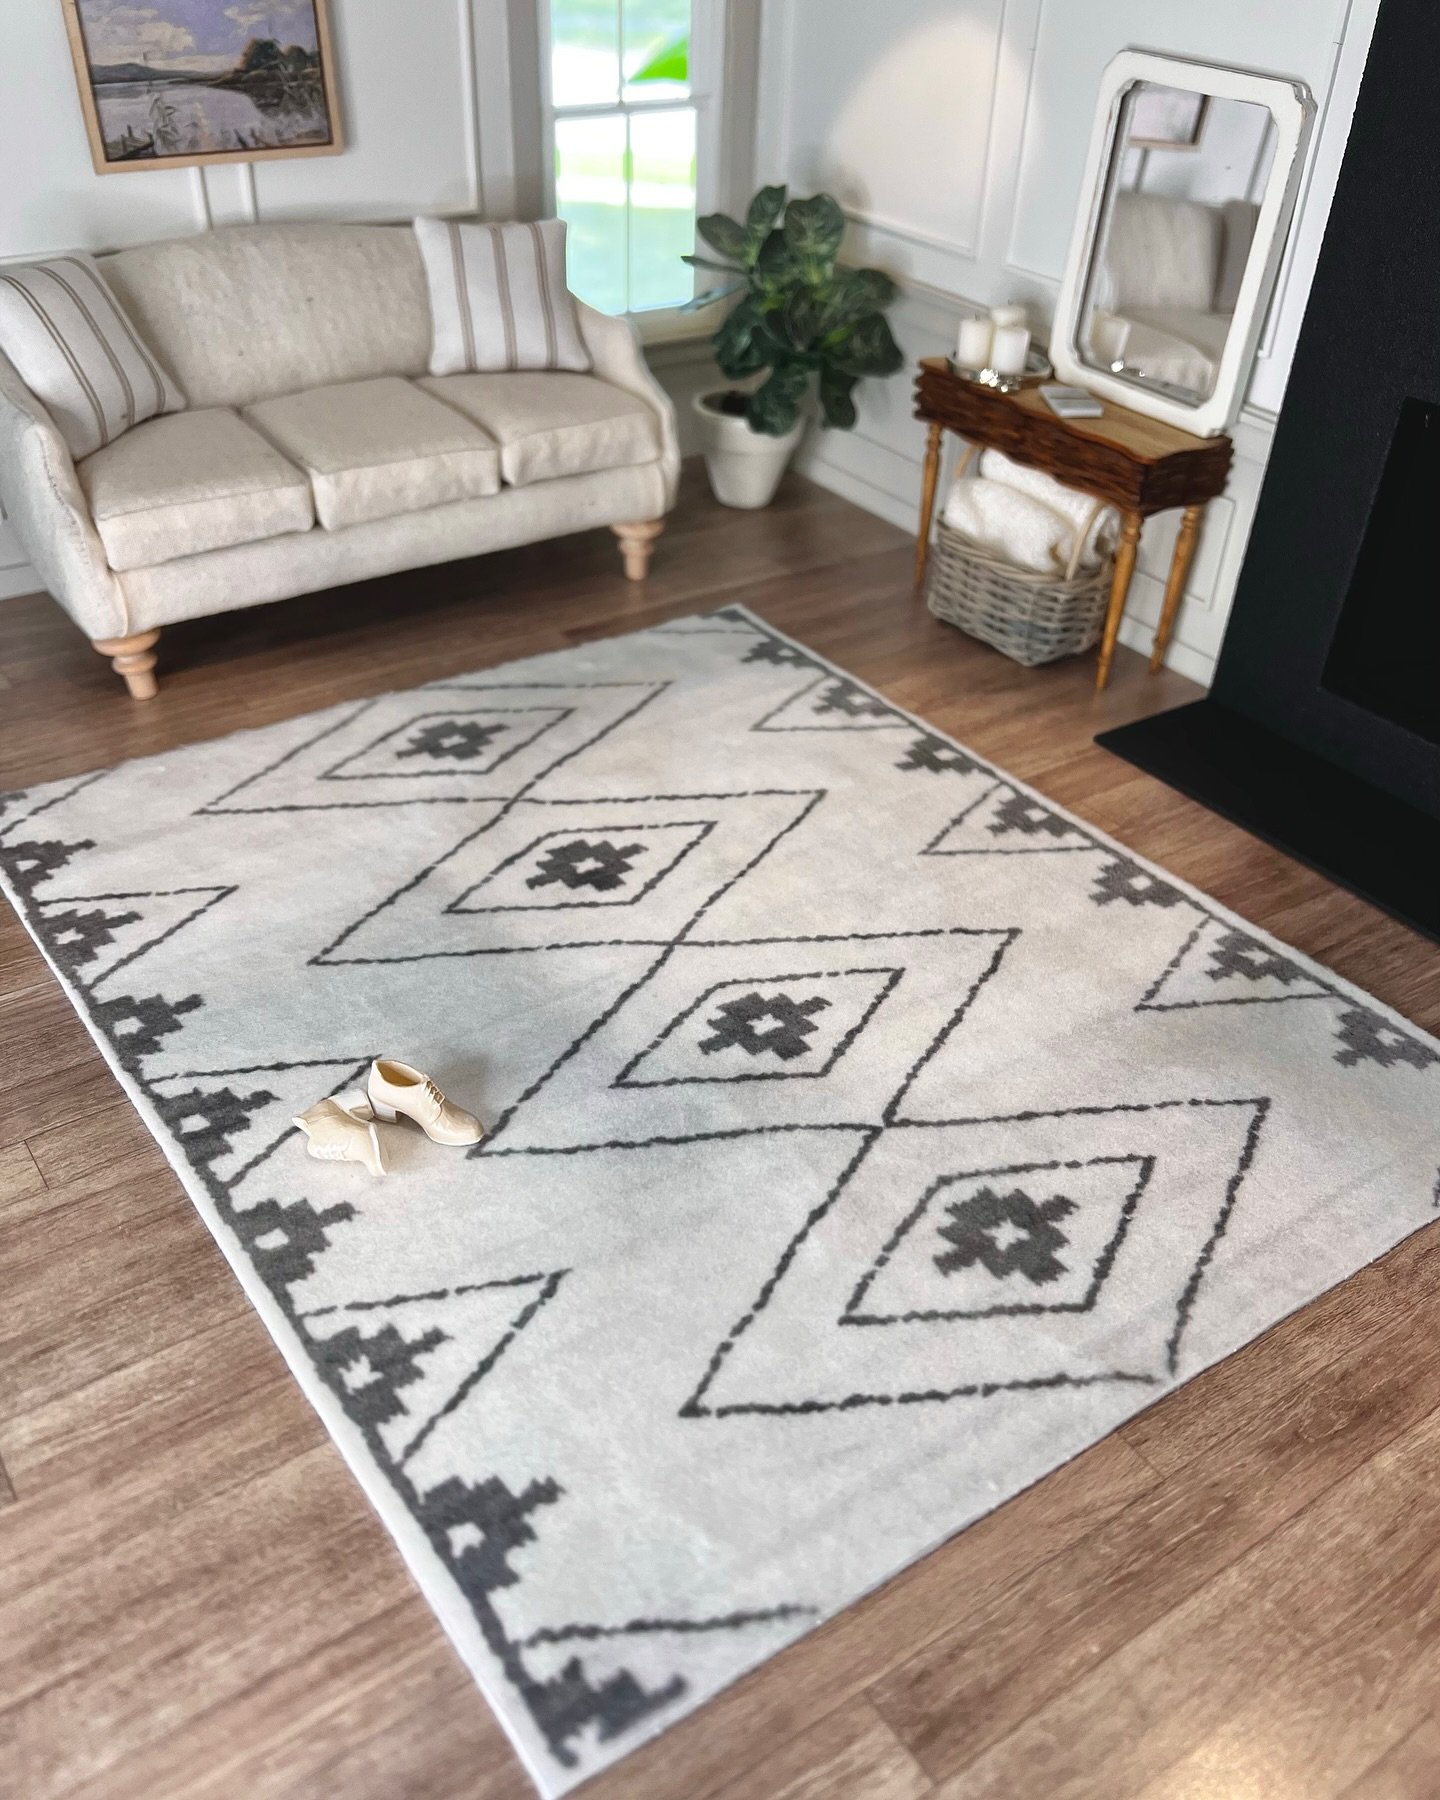 We&rsquo;ve got new rugs in stock! This extra soft Scandi Fabric Rug is available in four sizes from our Etsy shop. And for a limited time, all of the rugs in our shop are on sale! ✨⭐️⚡️